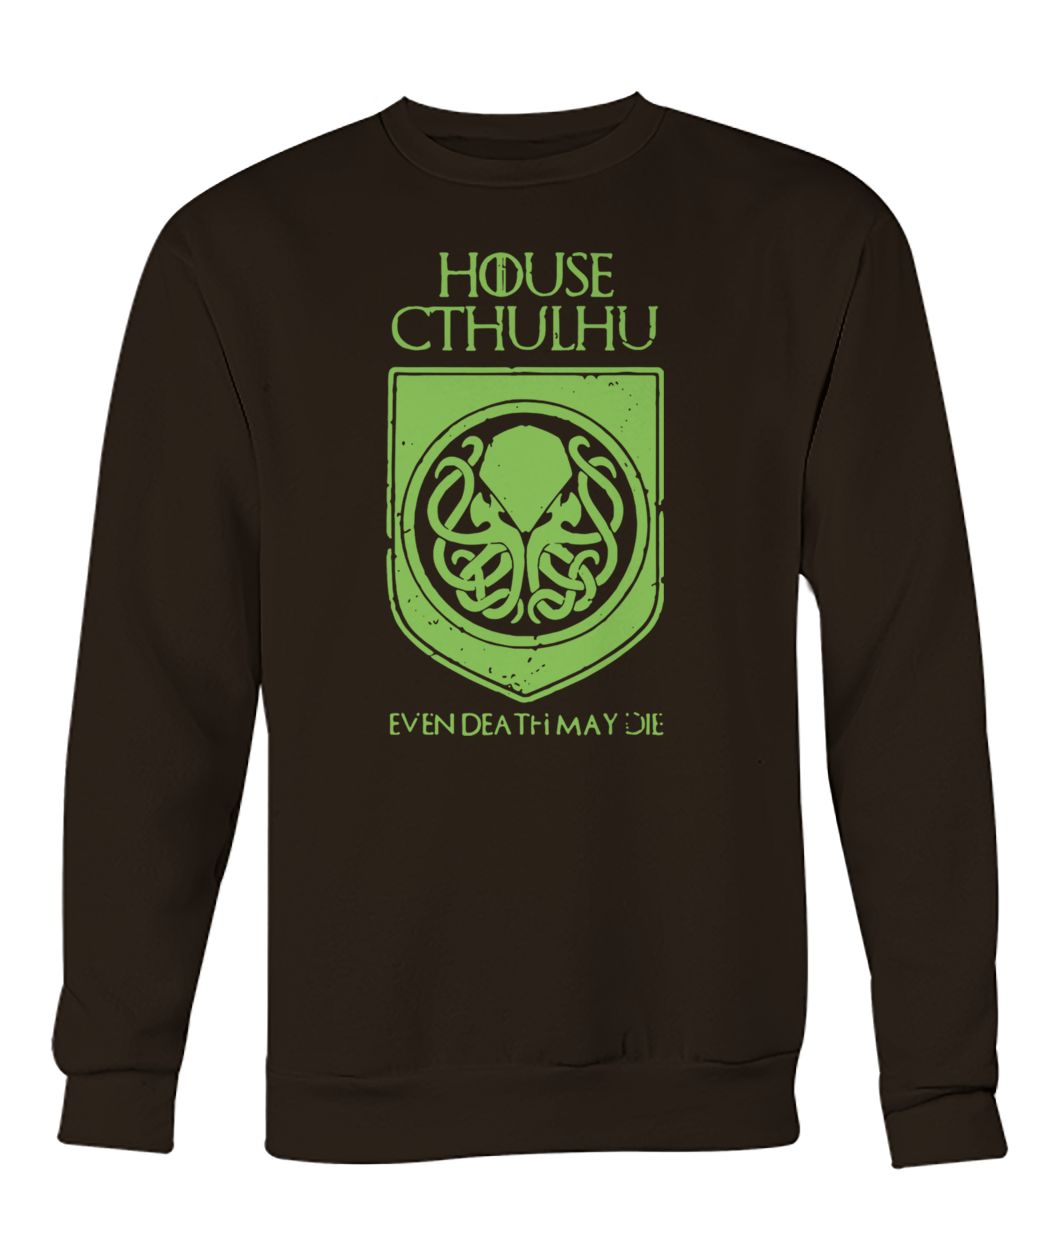 Game of thrones house cthulhu even death may die crew neck sweatshirt